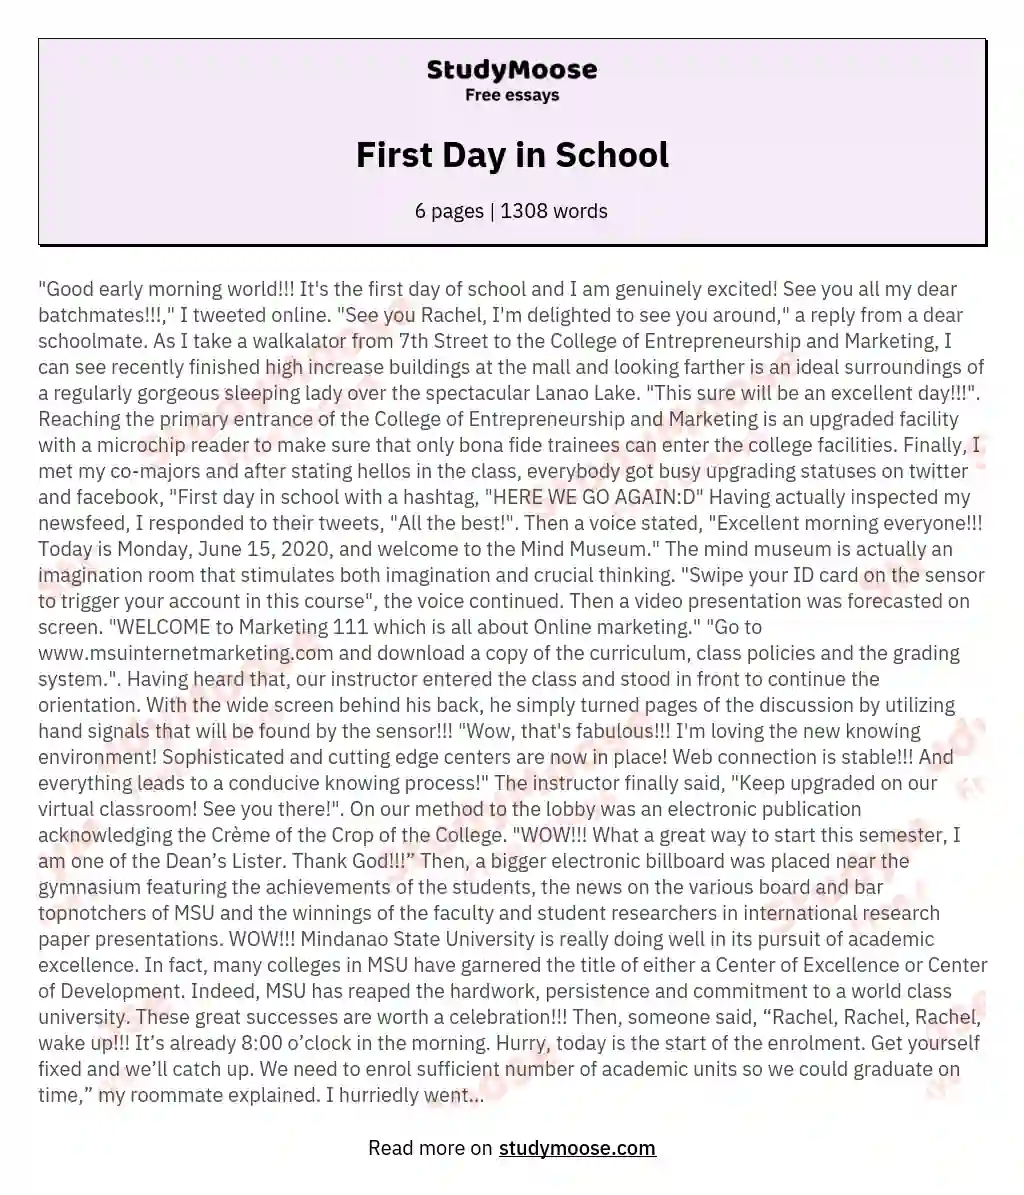 my first day at school essay 350 words